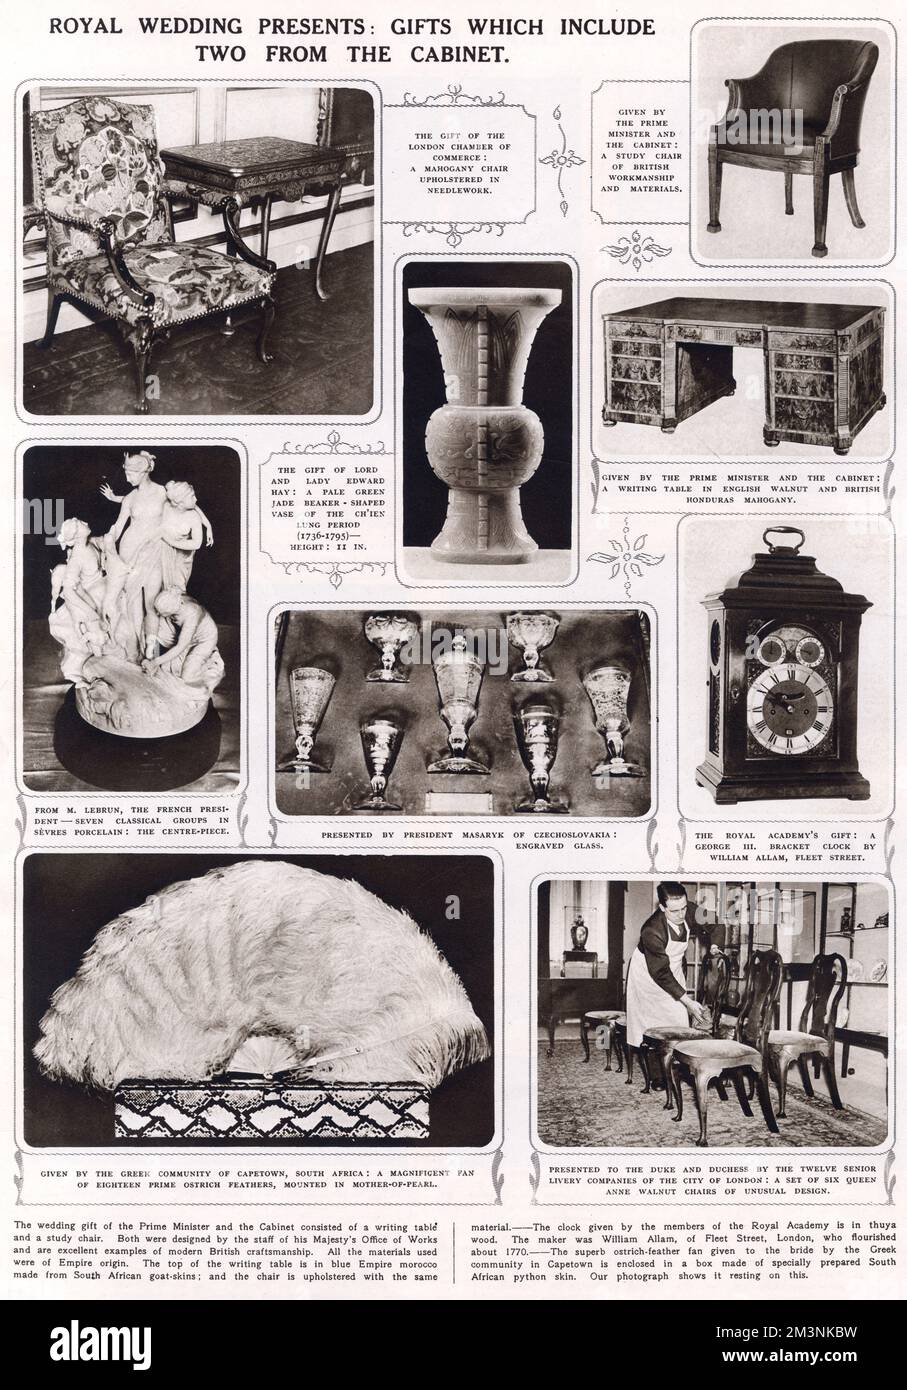 A page from The Illustrated London News showing some of the gifts received by Prince George, Duke of Kent and Princess Marina of Greece on the occasion of their marriage on 29 November 1934.  Presents seen here include a figurine in Sevres porcelain from the French president, a magnificent ostrich feather fan from the Greek community of Capetown, South Africa and a writing table of English walnut and British Honduras Mahogany from the Prime Minister and the Cabinet.     Date: 1934 Stock Photo